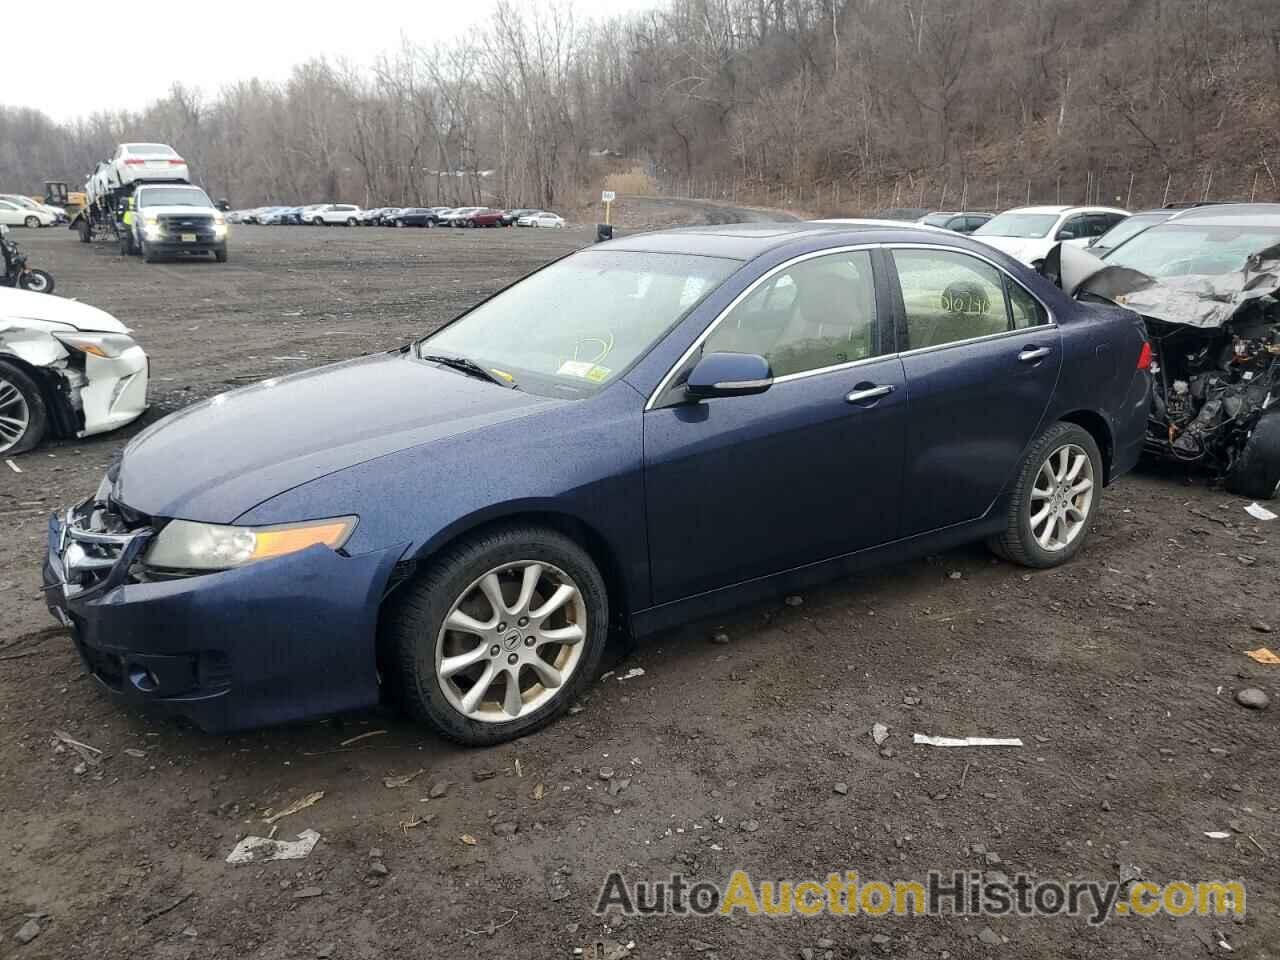 2008 ACURA TSX, JH4CL96858C011400